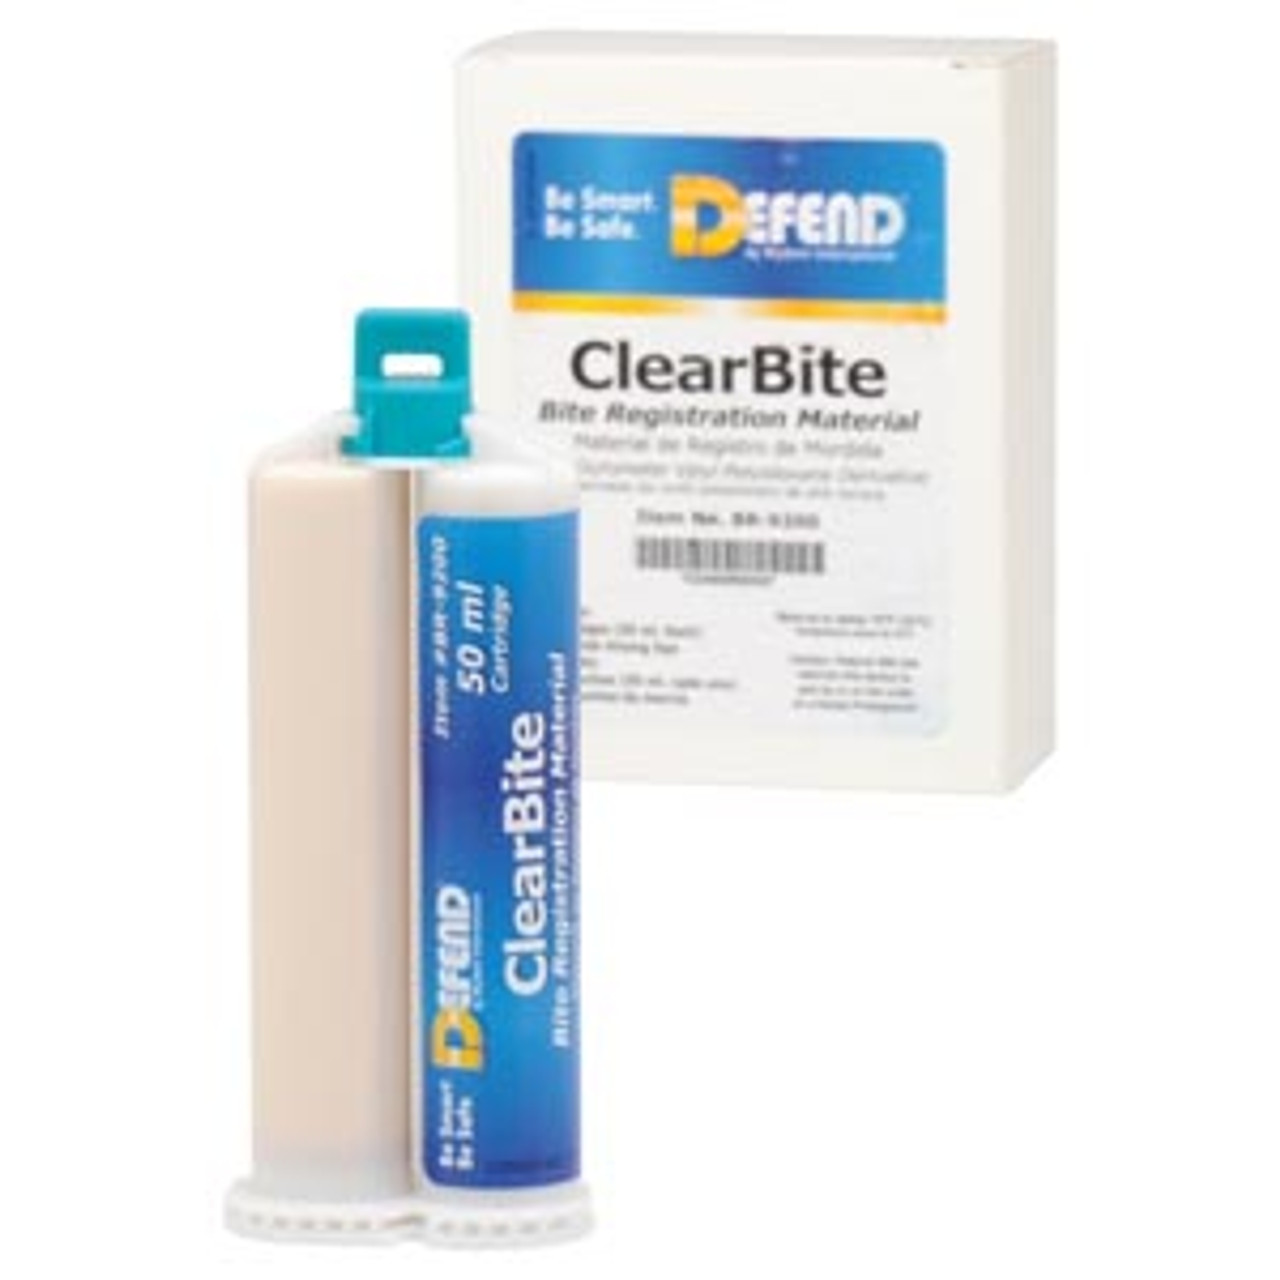 MYDENT DEFEND CLEARBITE, BR-9200